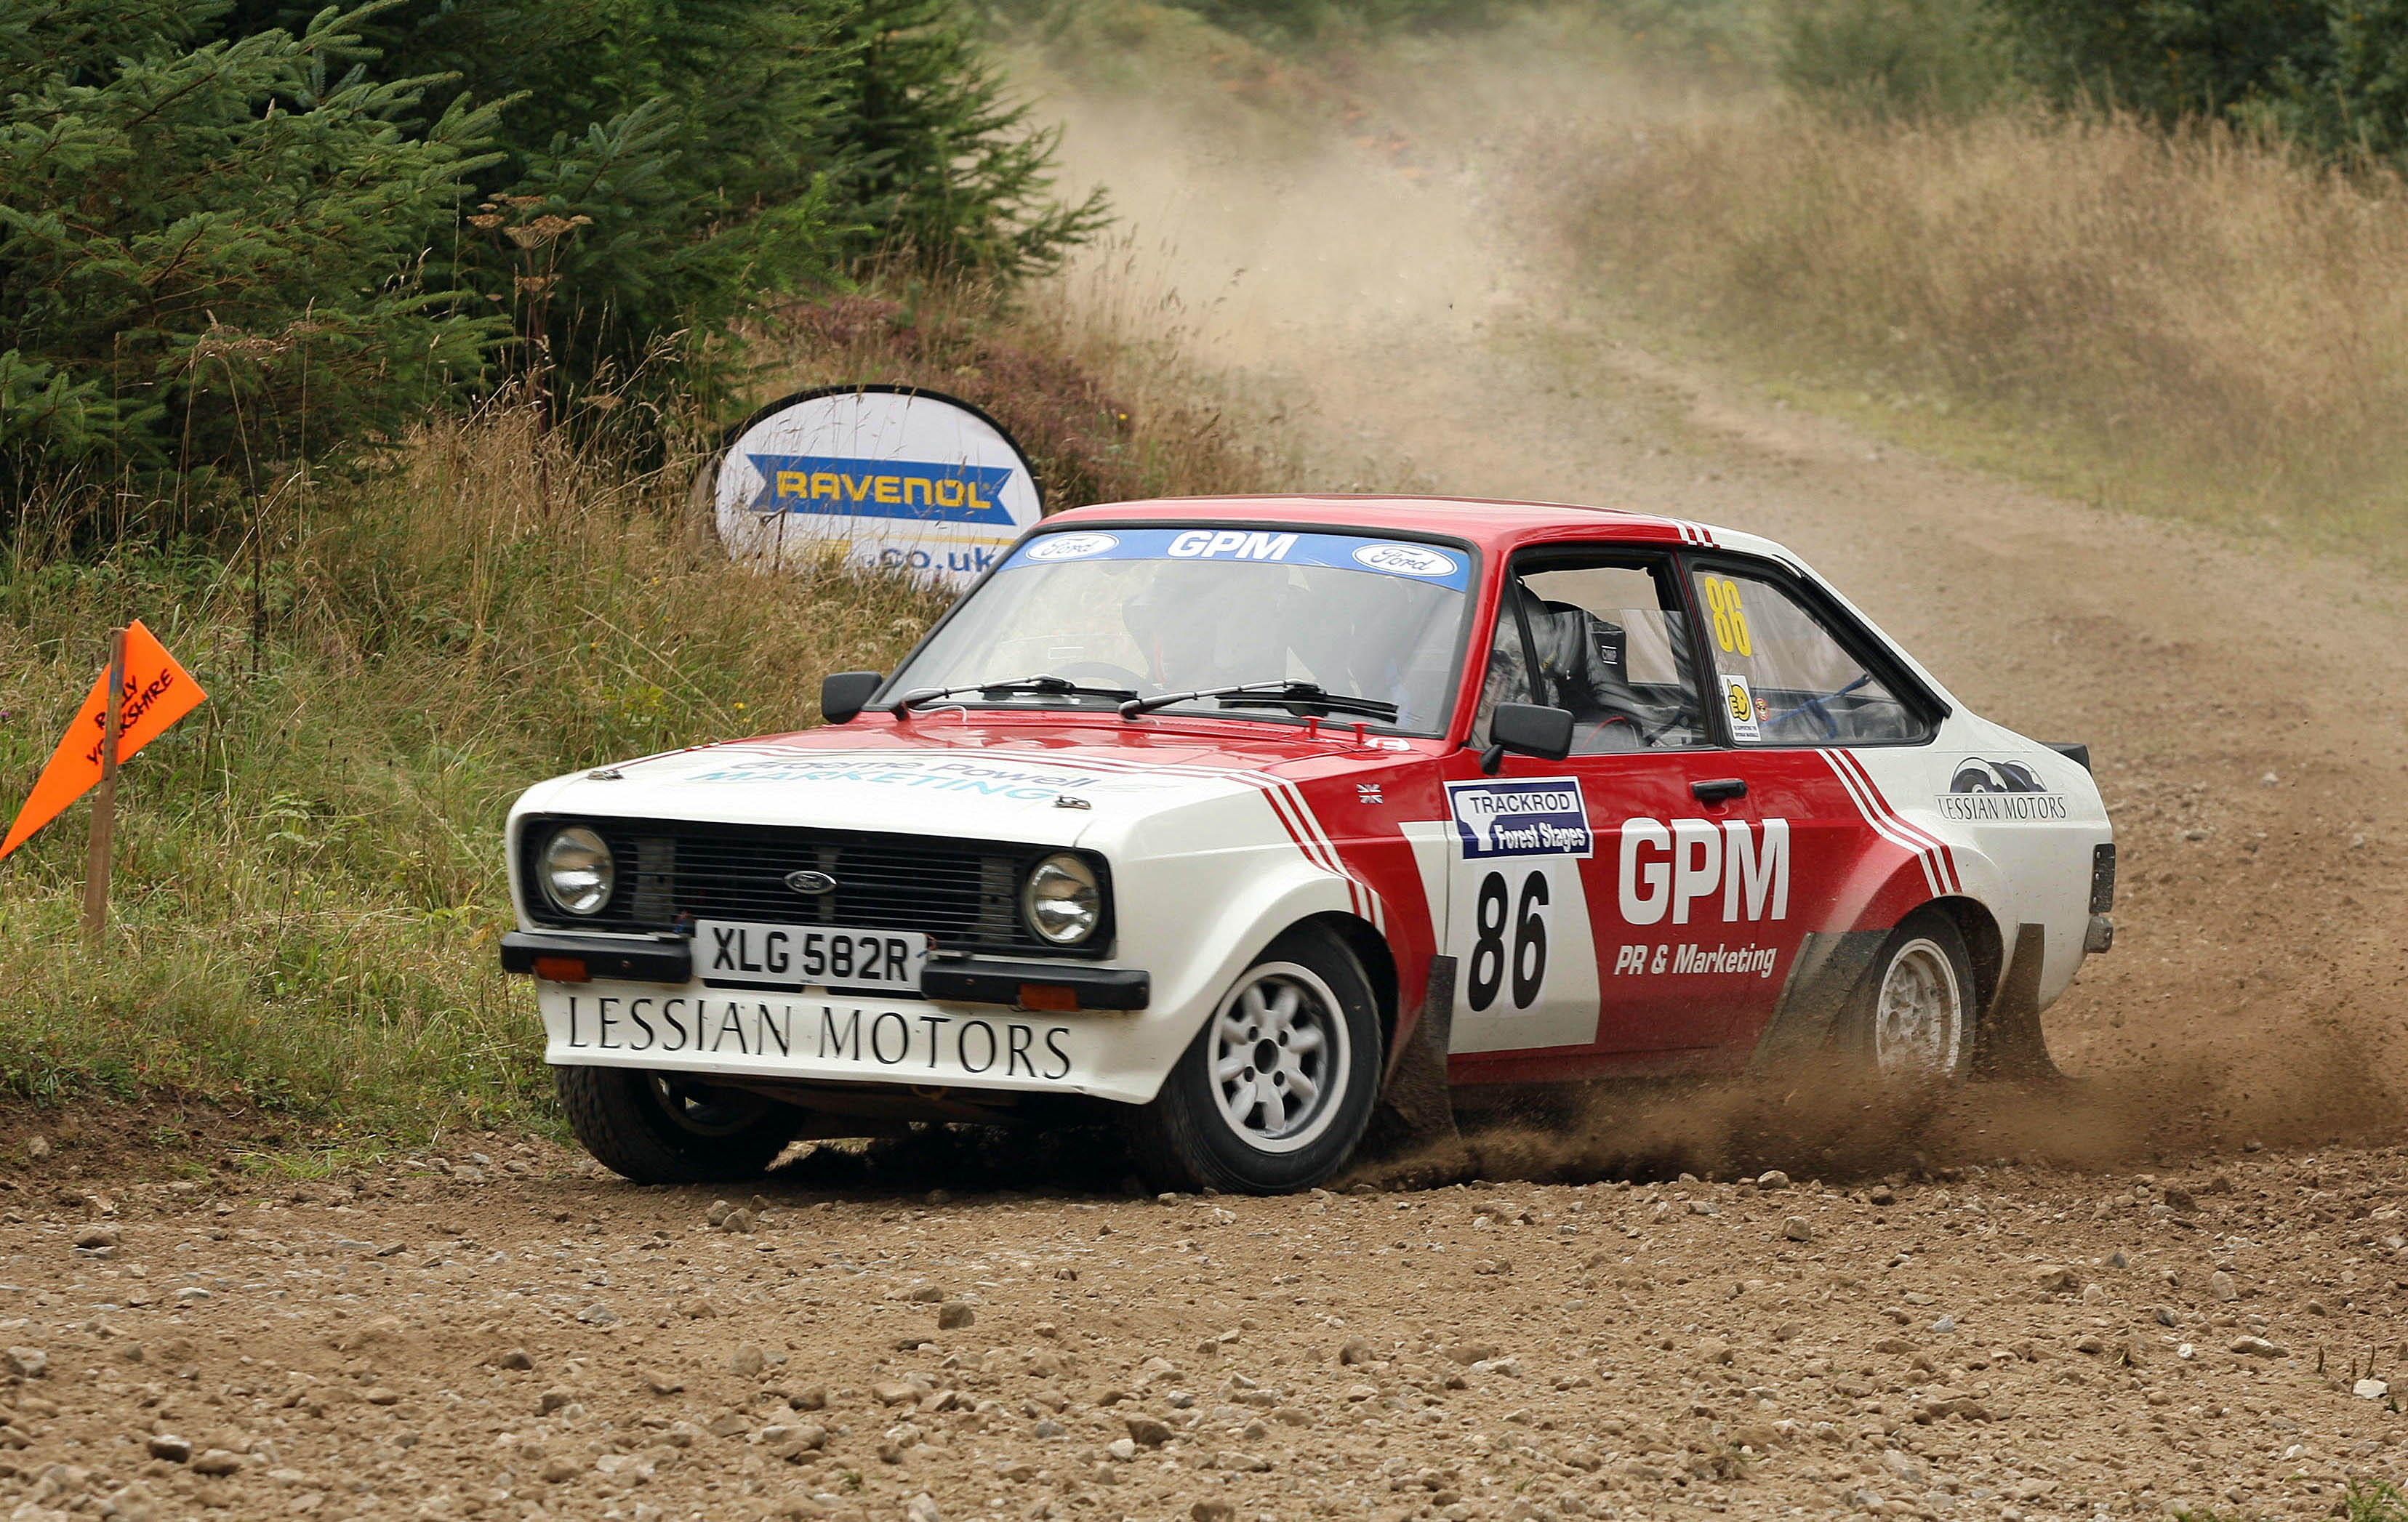 HISTORIC RALLY VICTORY FOR GPM